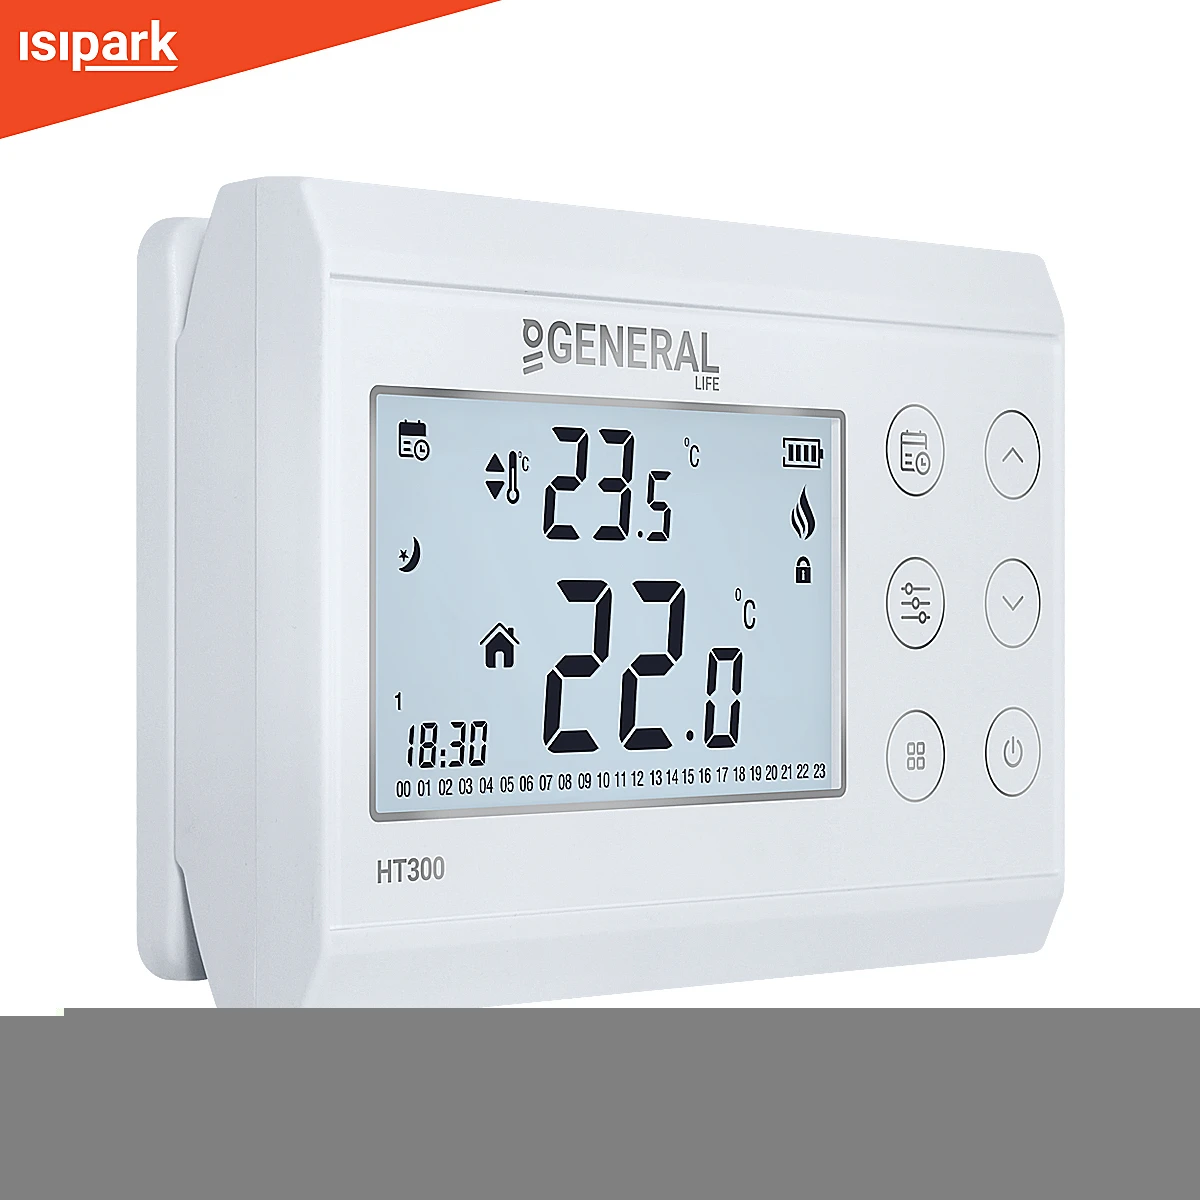 HT-270 SET Programmable Wireless Room Thermostat Easy to Use Large LCD Display